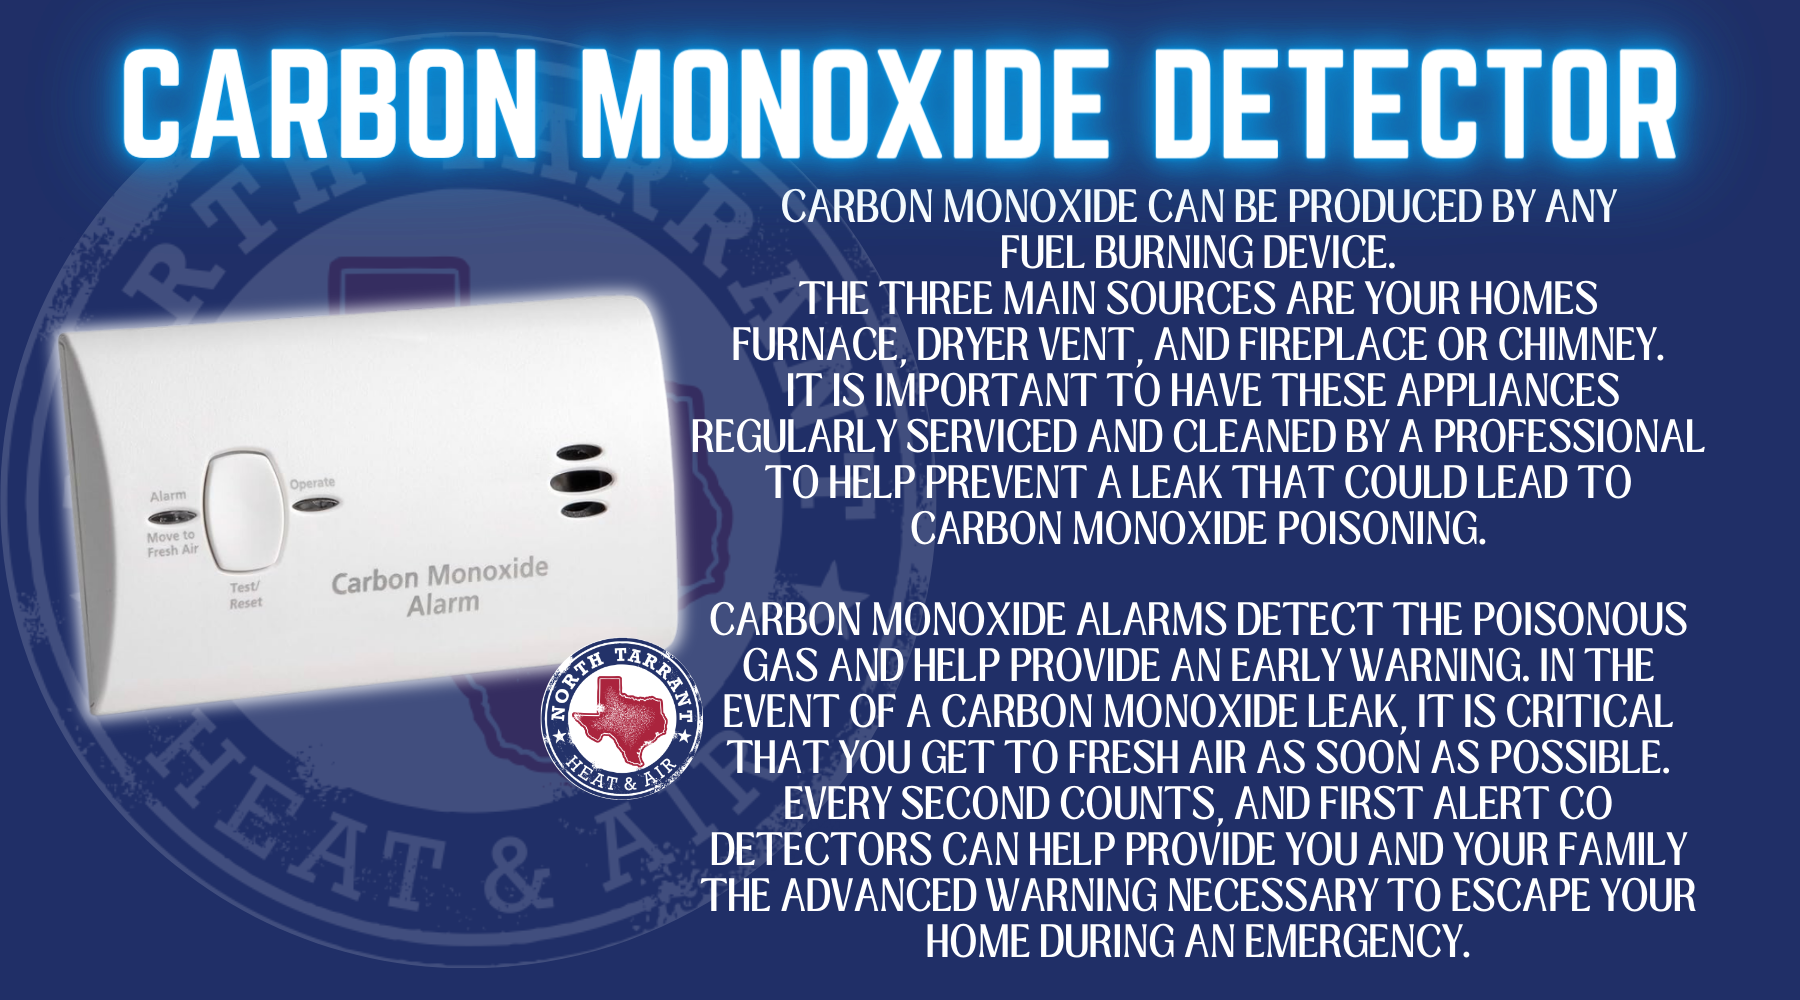 Carbon monoxide can be produced by any fuel burning device. The three main sources are your homes furnace, dryer venT, and fireplace or chimney. It is important to have these appliances regularly serviced and cleaned by a professional to help prevent a leak that could lead to carbon monoxide poisoning. Carbon monoxide alarms detect the poisonous gas and help provide an early warning. In the event of a carbon monoxide leak, it is critical that you get to fresh air as soon as possible. Every second counts, and First Alert CO detectors can help provide you and your family the advanced warning necessary to escape your home during an emergency.